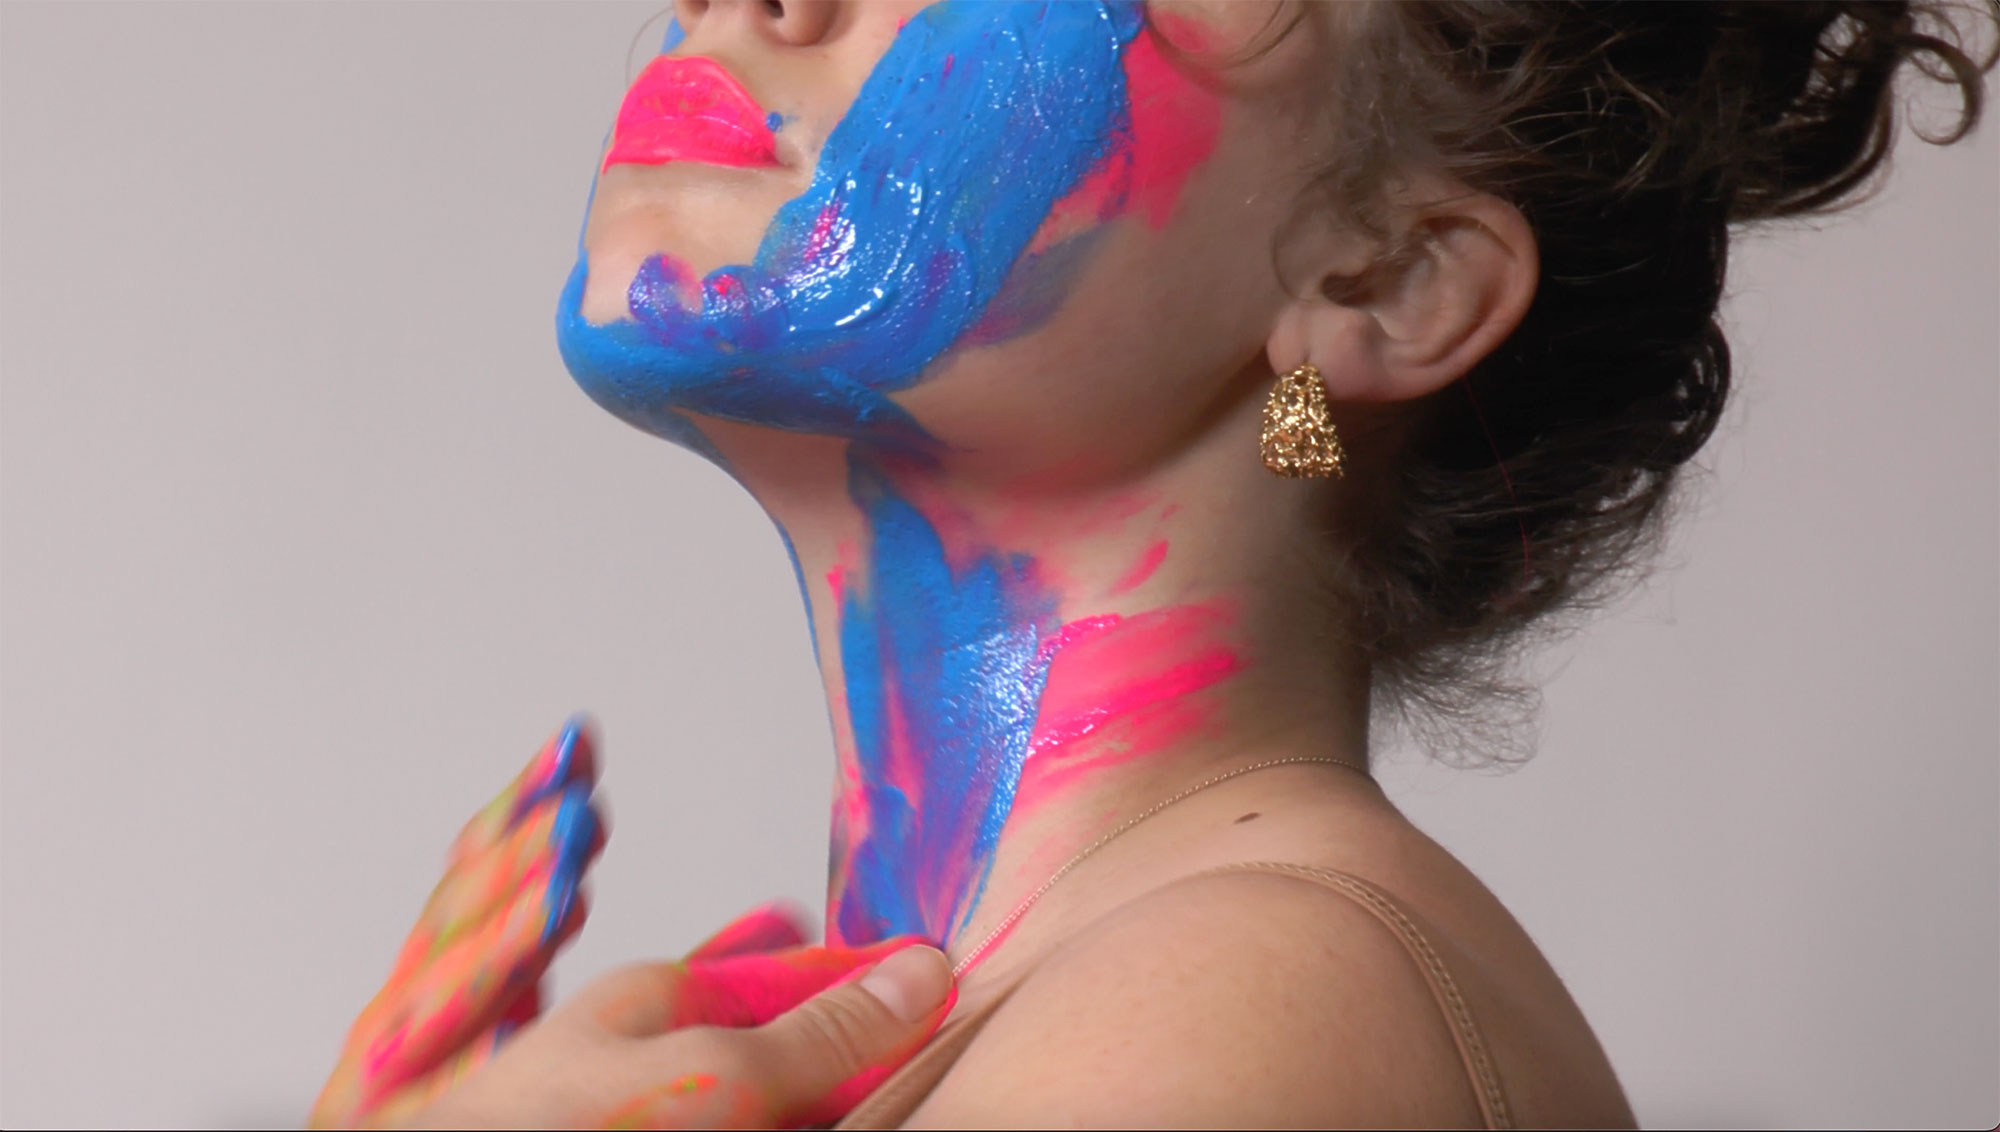 A person seen in profile applies pink and blue paint to their neck and face.